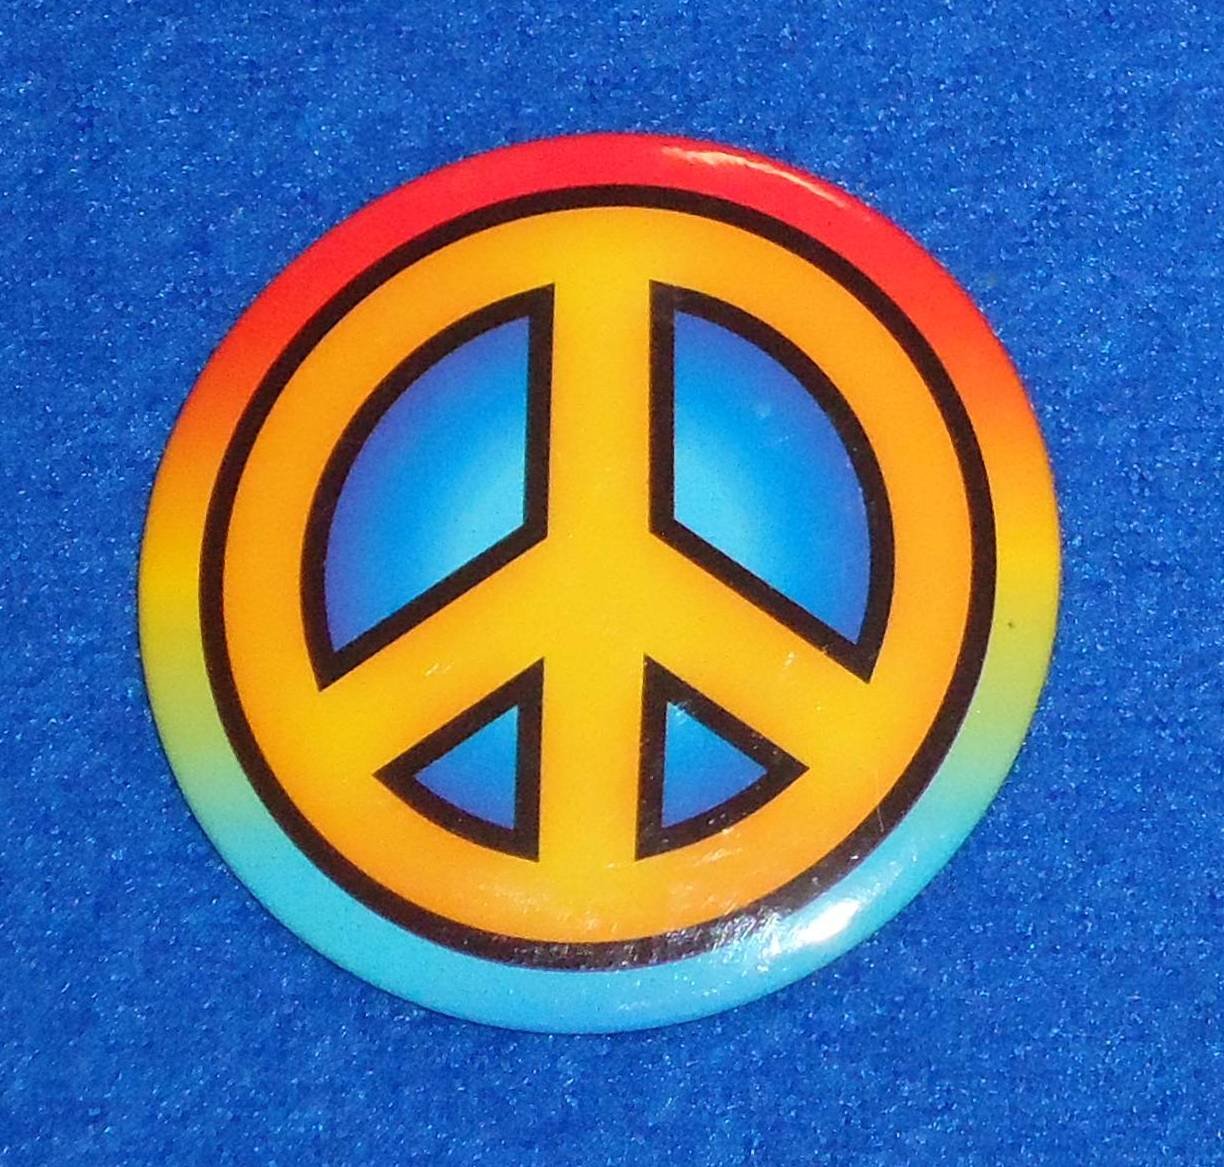 60S & 70S PEACE SIGN SYMBOL PIN BRITISH CAMPAIGN LOGO FOR NUCLEAR ...